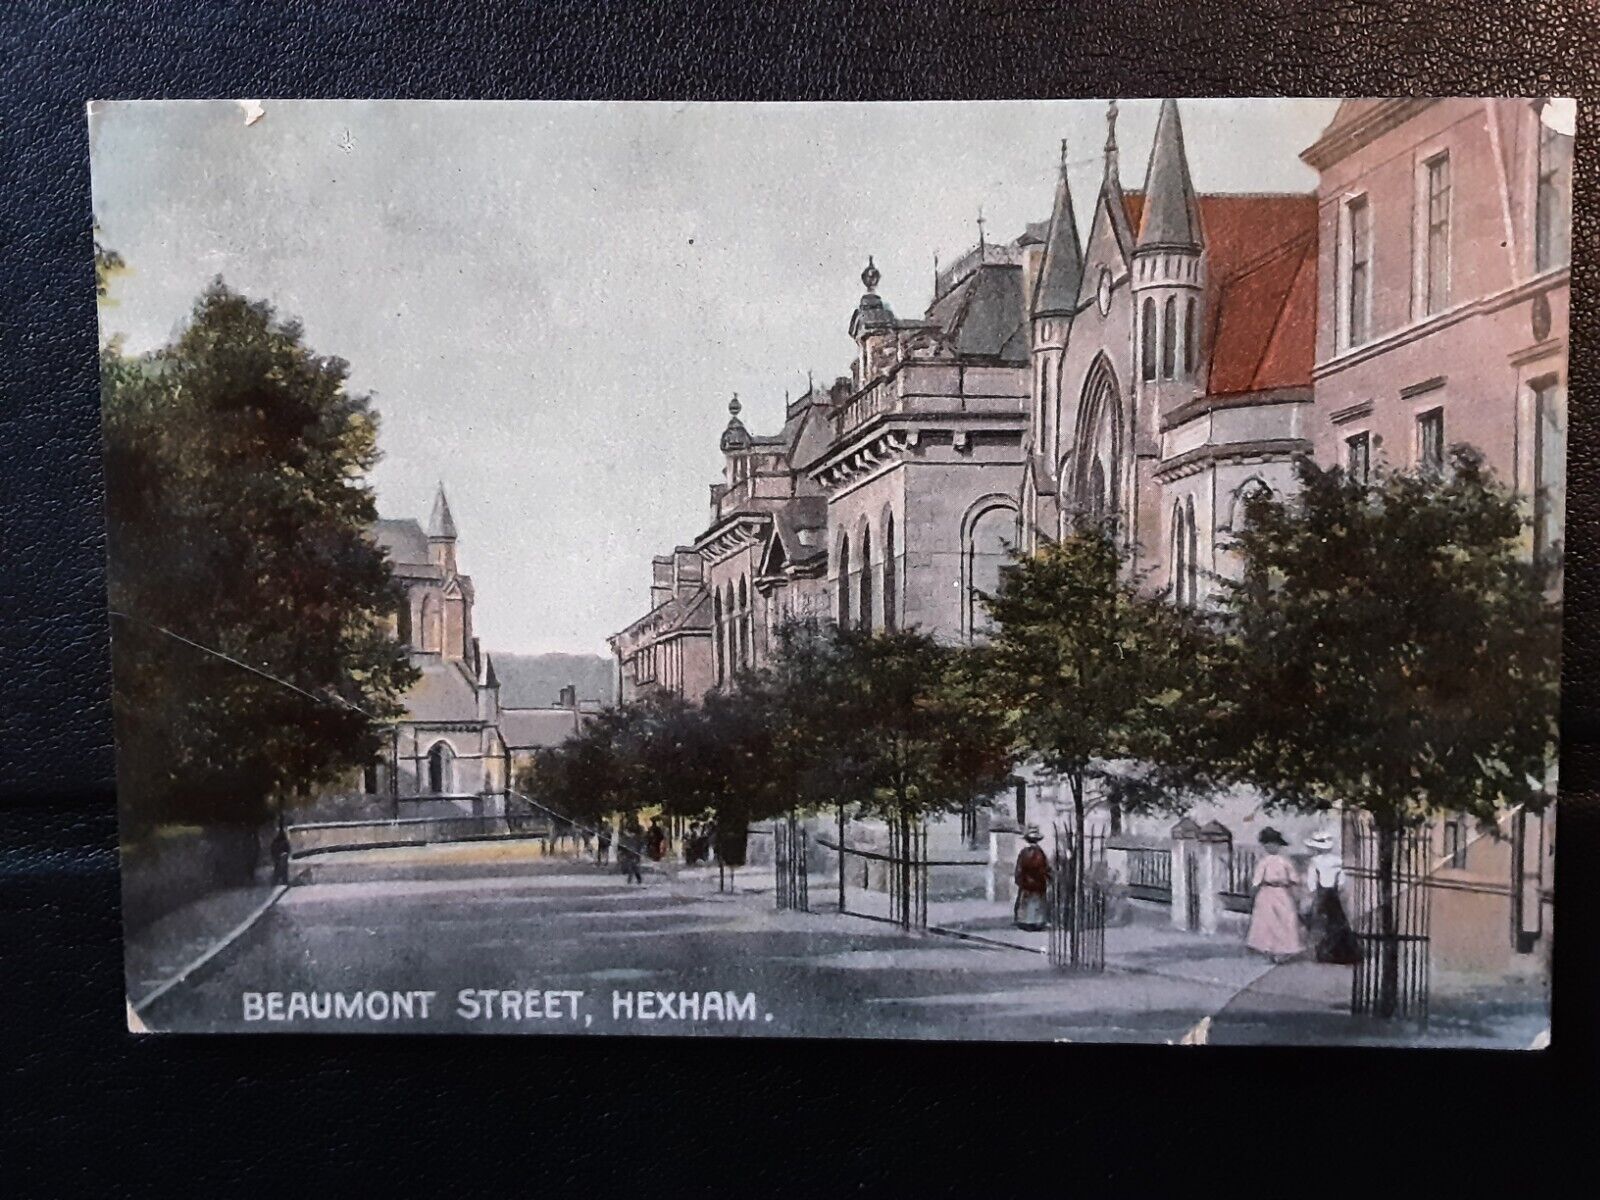 House Clearance:Old Gem series service of Beaumont Street, Hexham, Northumberland posted 1907AF